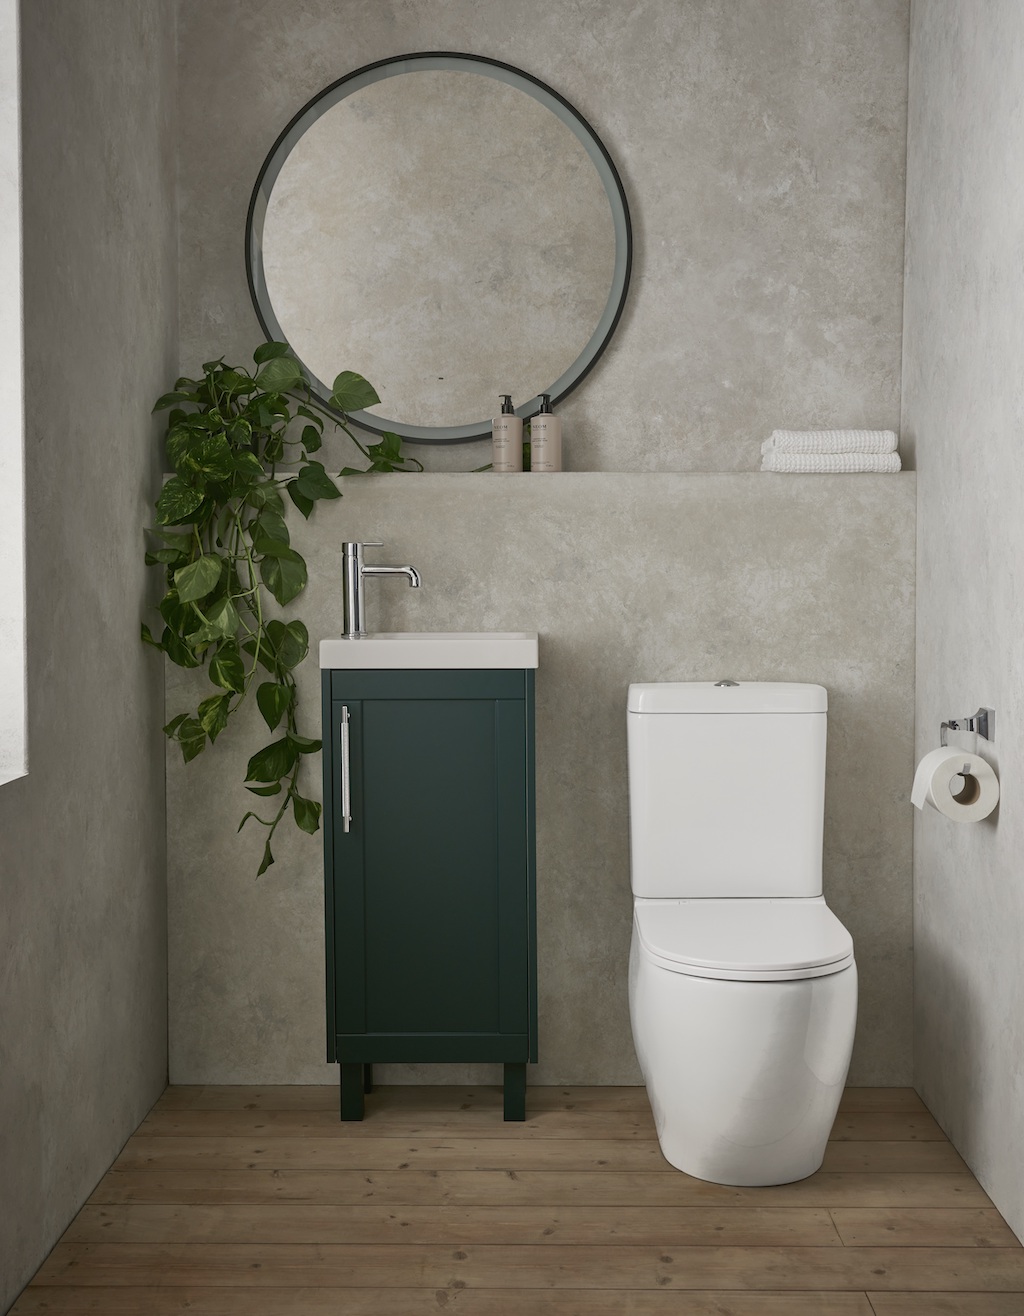 Heritage Bathrooms unveils new collection of products